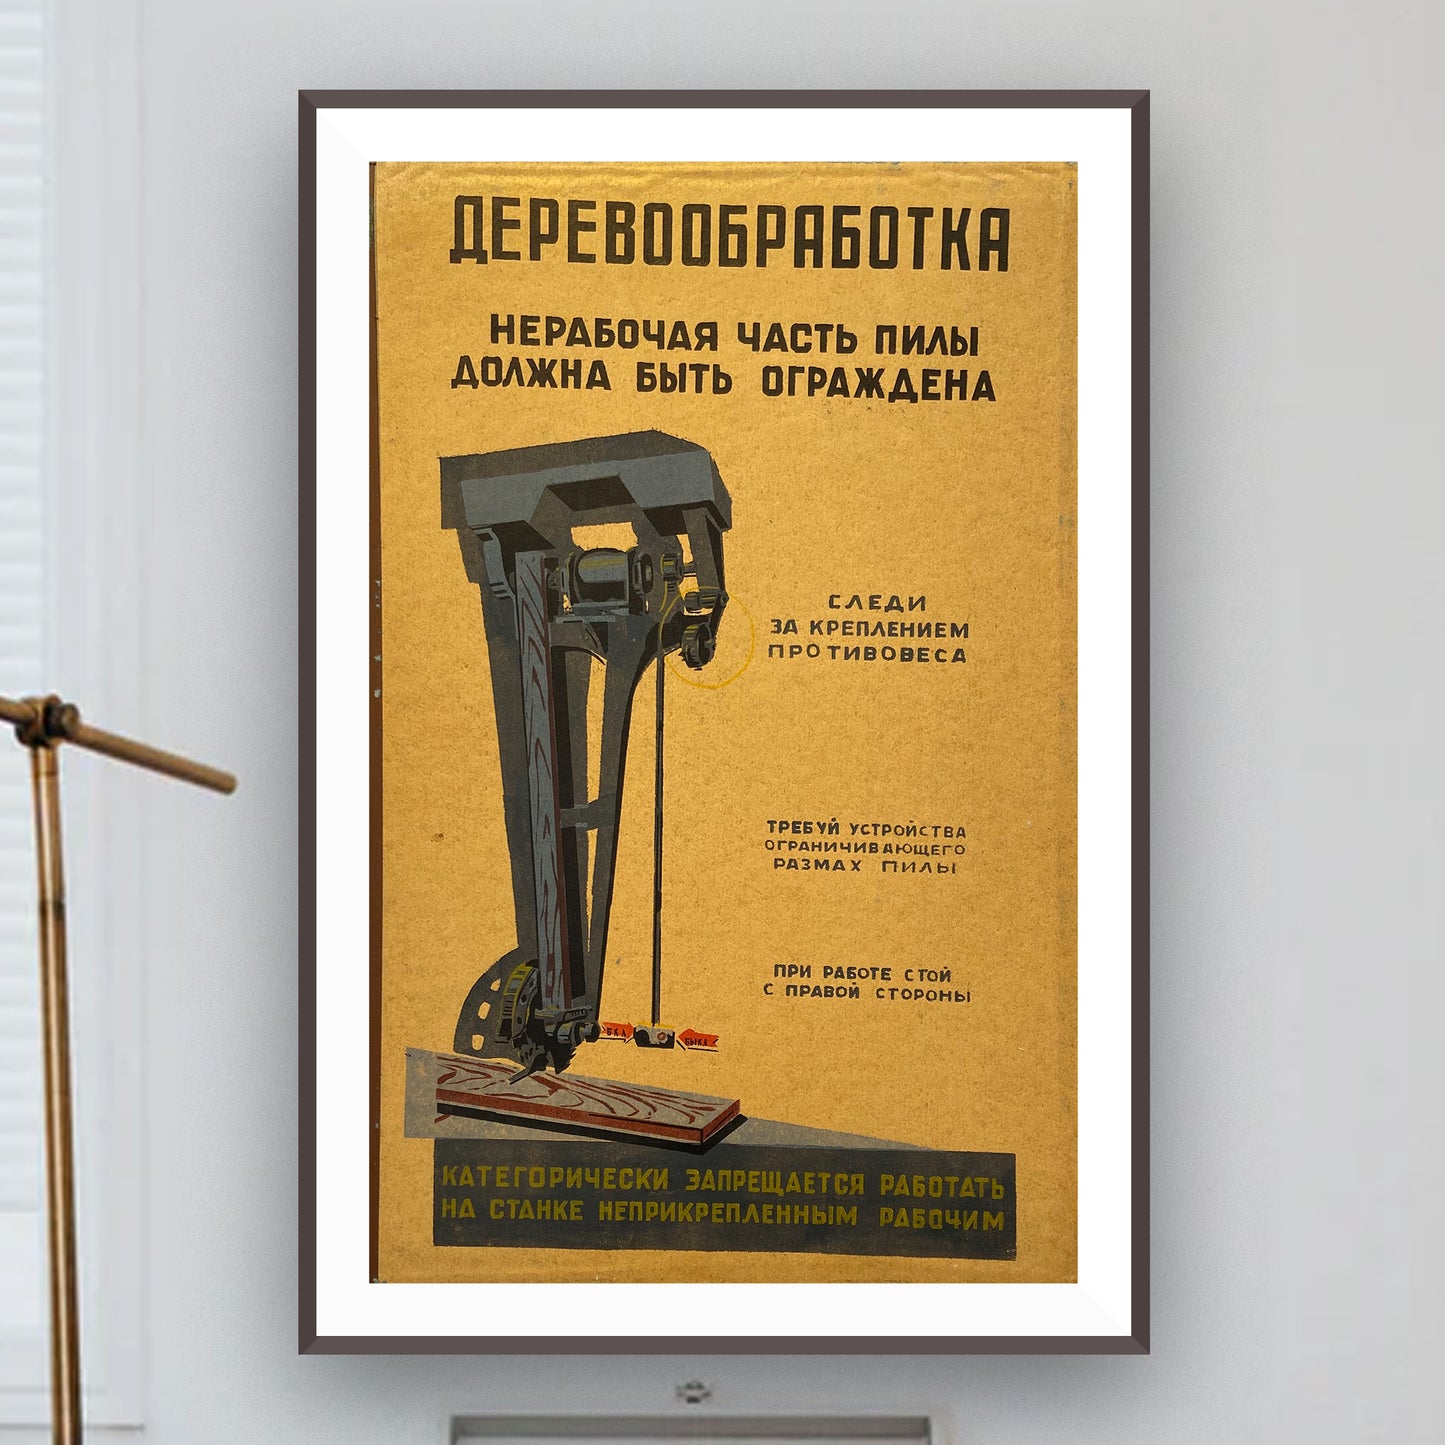 Poster, "Woodworking", Worker safety VEF Riga, Latvian SSR, 1960s